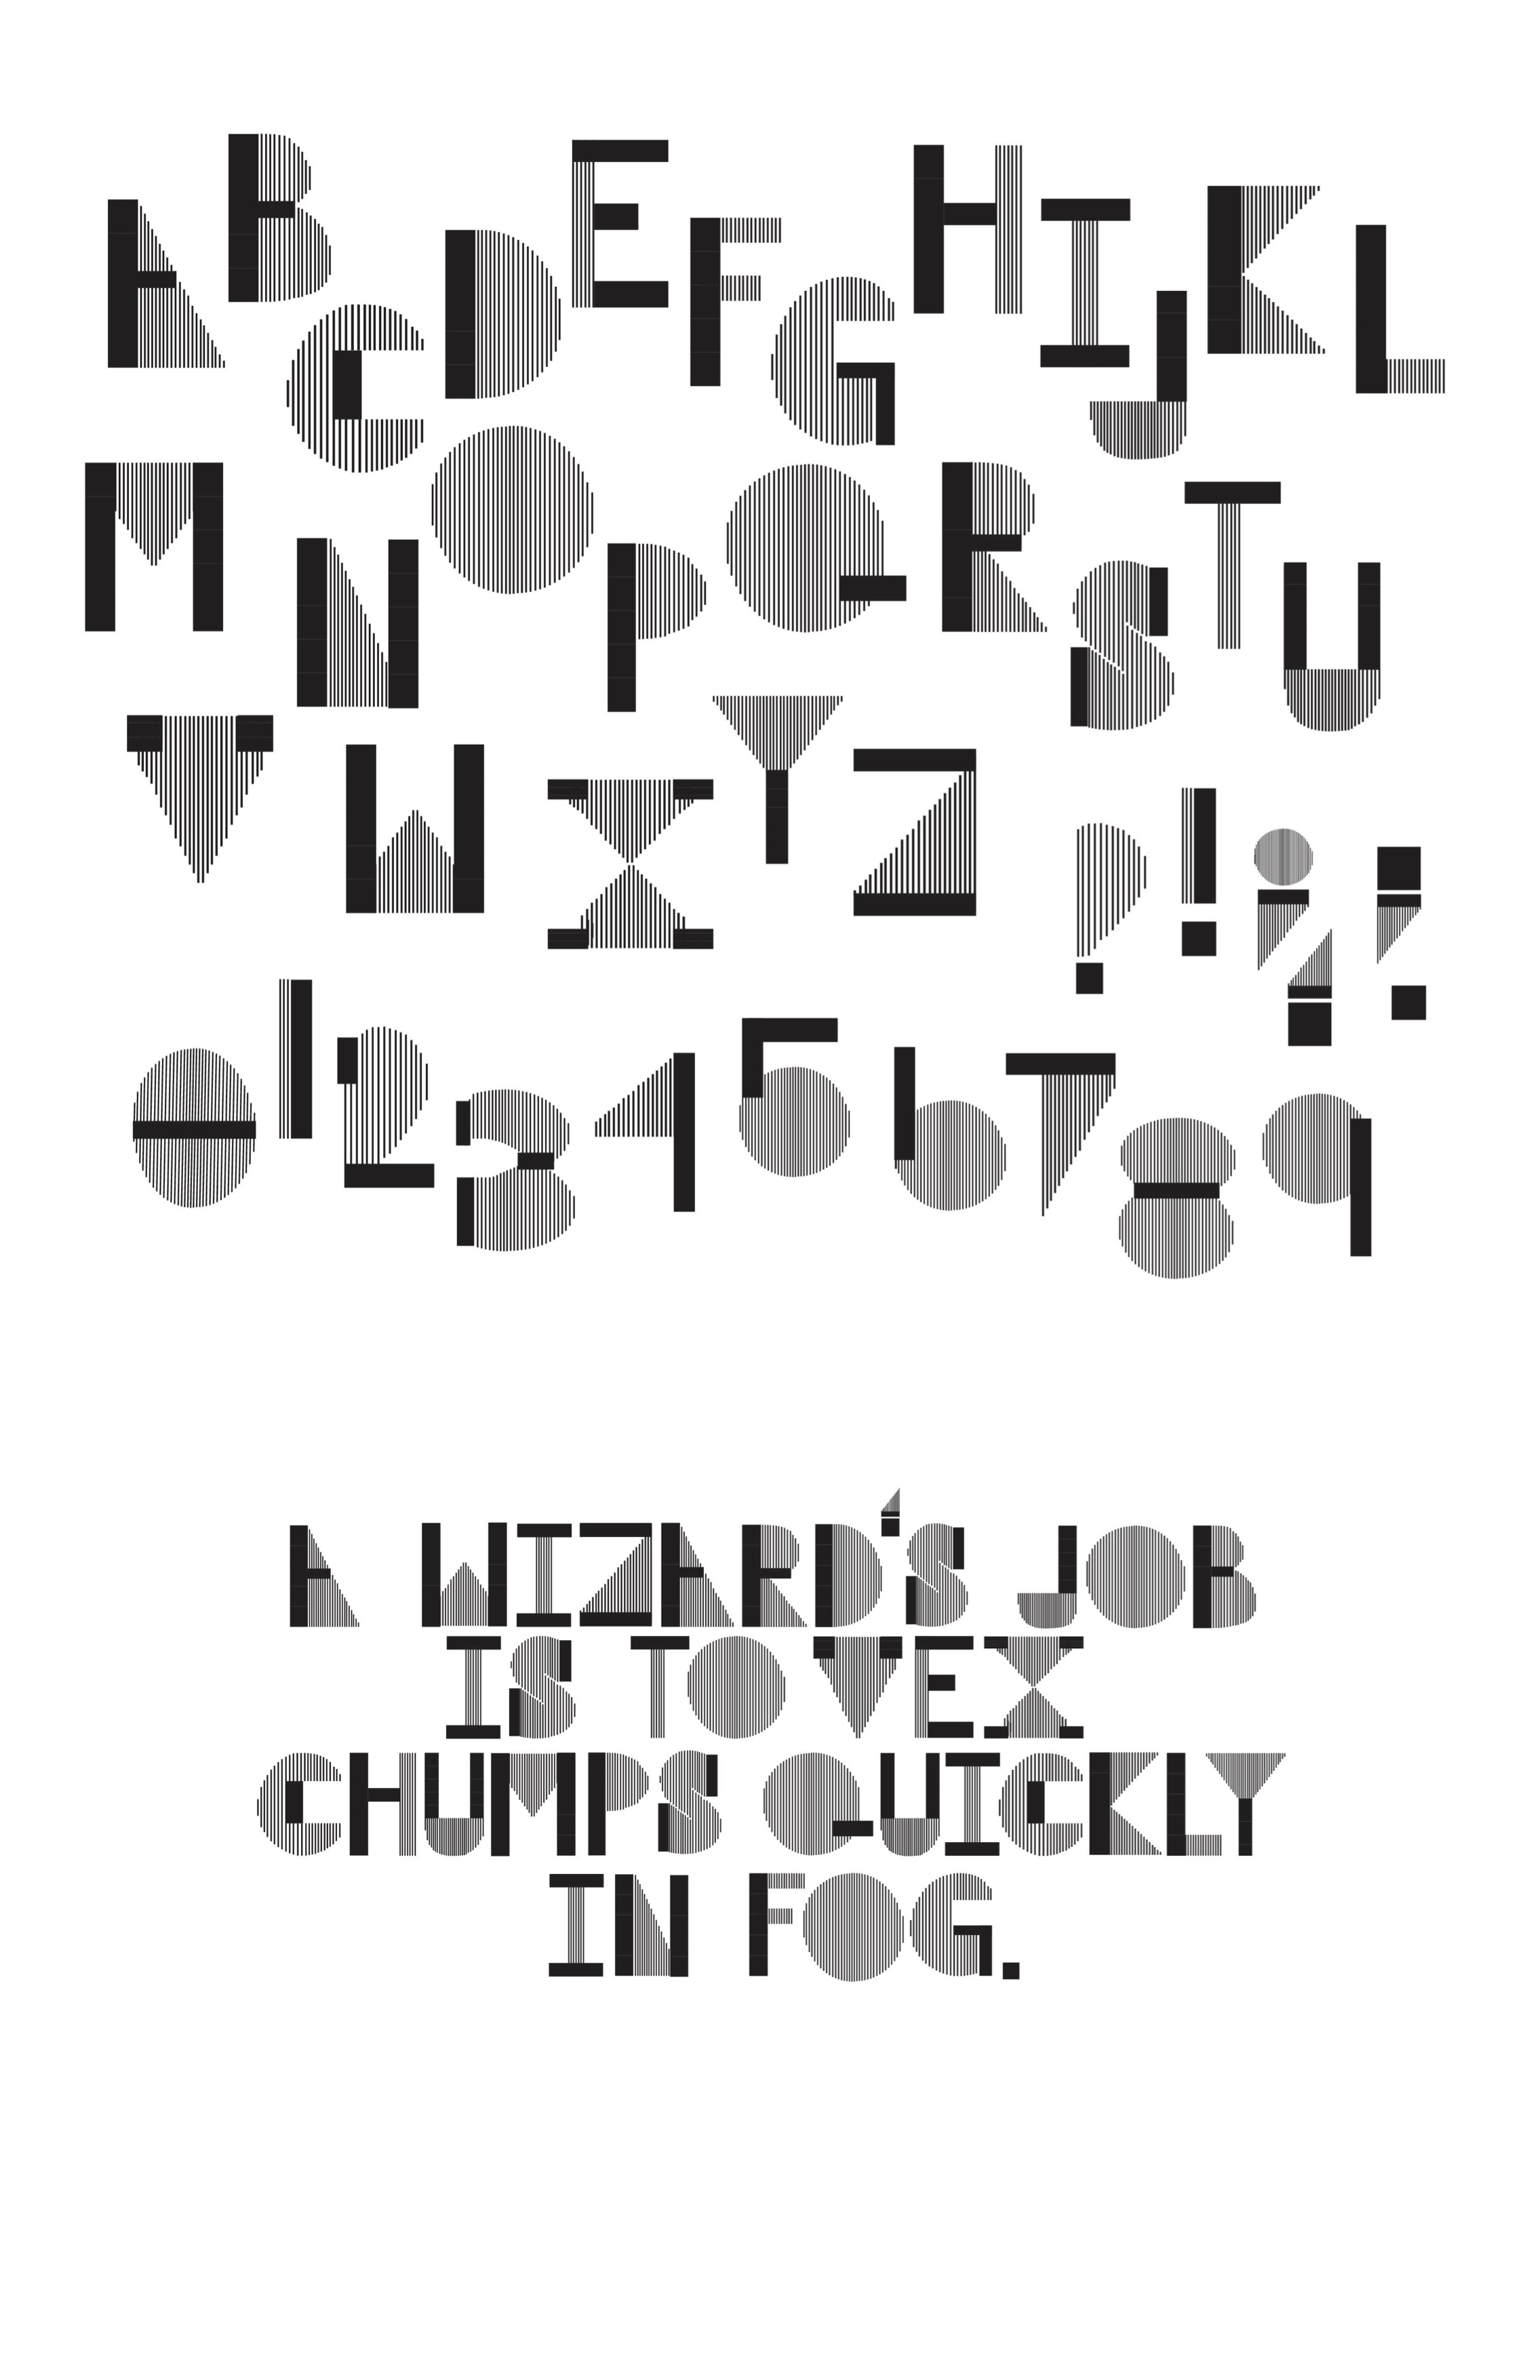 A students type project where they created their own typeface.